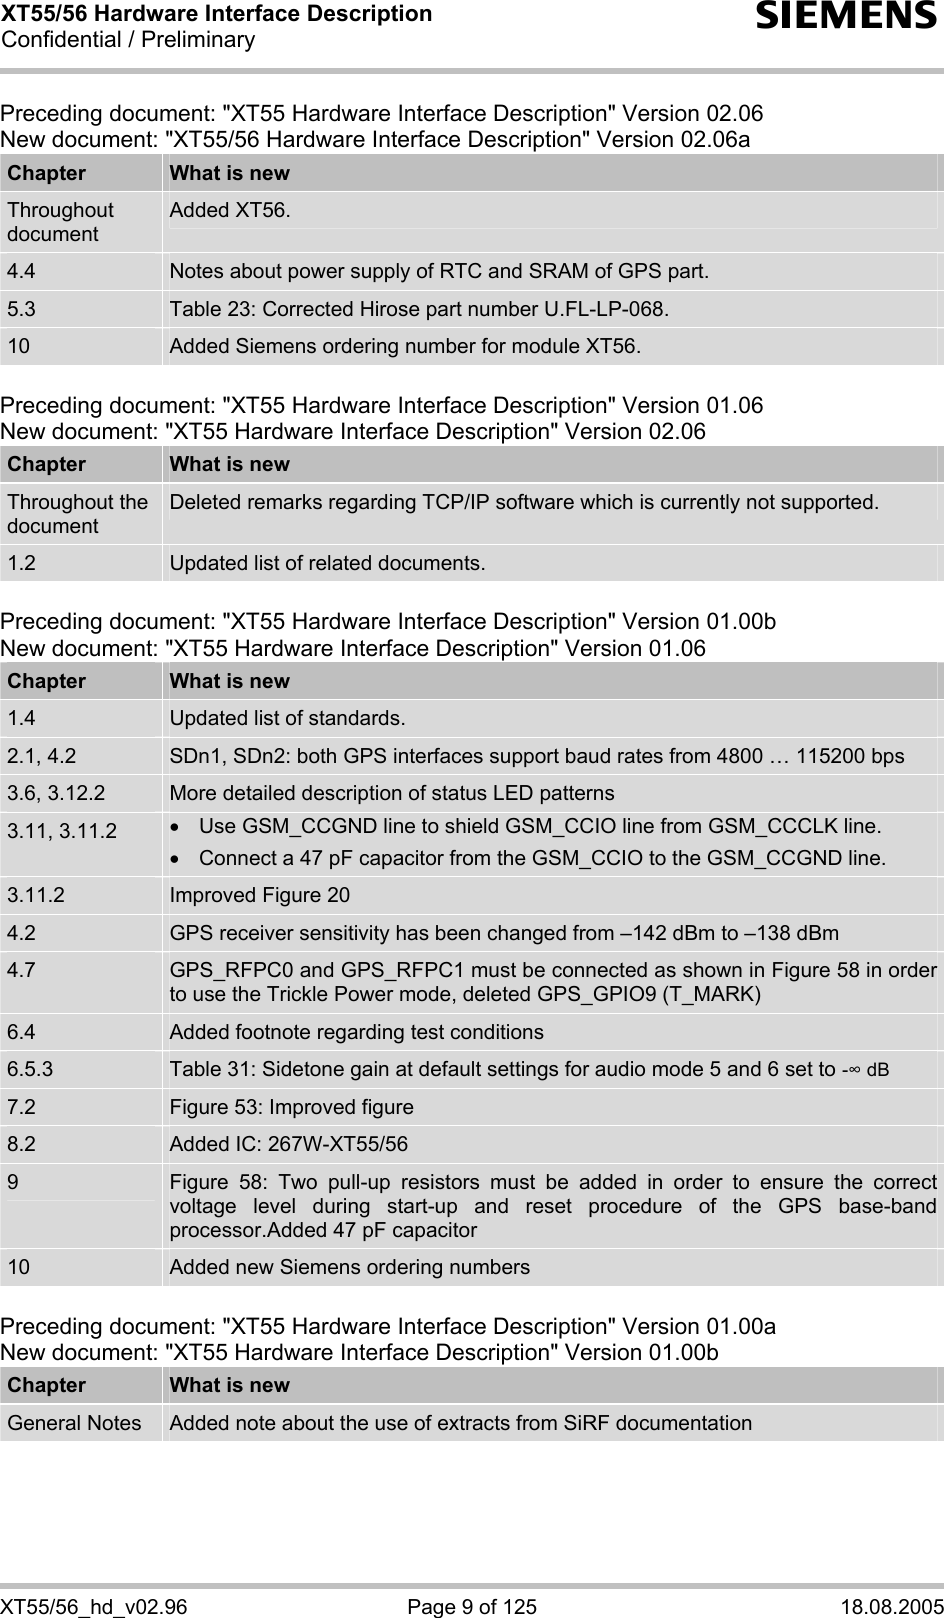 XT55/56 Hardware Interface Description Confidential / Preliminary s XT55/56_hd_v02.96  Page 9 of 125  18.08.2005 Preceding document: &quot;XT55 Hardware Interface Description&quot; Version 02.06 New document: &quot;XT55/56 Hardware Interface Description&quot; Version 02.06a Chapter  What is new Throughout document Added XT56. 4.4  Notes about power supply of RTC and SRAM of GPS part. 5.3  Table 23: Corrected Hirose part number U.FL-LP-068. 10  Added Siemens ordering number for module XT56.  Preceding document: &quot;XT55 Hardware Interface Description&quot; Version 01.06 New document: &quot;XT55 Hardware Interface Description&quot; Version 02.06 Chapter  What is new Throughout the document Deleted remarks regarding TCP/IP software which is currently not supported. 1.2  Updated list of related documents.  Preceding document: &quot;XT55 Hardware Interface Description&quot; Version 01.00b New document: &quot;XT55 Hardware Interface Description&quot; Version 01.06 Chapter  What is new 1.4  Updated list of standards. 2.1, 4.2  SDn1, SDn2: both GPS interfaces support baud rates from 4800 … 115200 bps 3.6, 3.12.2  More detailed description of status LED patterns 3.11, 3.11.2  •  Use GSM_CCGND line to shield GSM_CCIO line from GSM_CCCLK line. •  Connect a 47 pF capacitor from the GSM_CCIO to the GSM_CCGND line. 3.11.2  Improved Figure 20 4.2  GPS receiver sensitivity has been changed from –142 dBm to –138 dBm 4.7  GPS_RFPC0 and GPS_RFPC1 must be connected as shown in Figure 58 in order to use the Trickle Power mode, deleted GPS_GPIO9 (T_MARK) 6.4  Added footnote regarding test conditions 6.5.3  Table 31: Sidetone gain at default settings for audio mode 5 and 6 set to - dB 7.2  Figure 53: Improved figure 8.2  Added IC: 267W-XT55/56 9  Figure 58: Two pull-up resistors must be added in order to ensure the correct voltage level during start-up and reset procedure of the GPS base-band processor.Added 47 pF capacitor  10  Added new Siemens ordering numbers  Preceding document: &quot;XT55 Hardware Interface Description&quot; Version 01.00a New document: &quot;XT55 Hardware Interface Description&quot; Version 01.00b Chapter  What is new General Notes  Added note about the use of extracts from SiRF documentation  